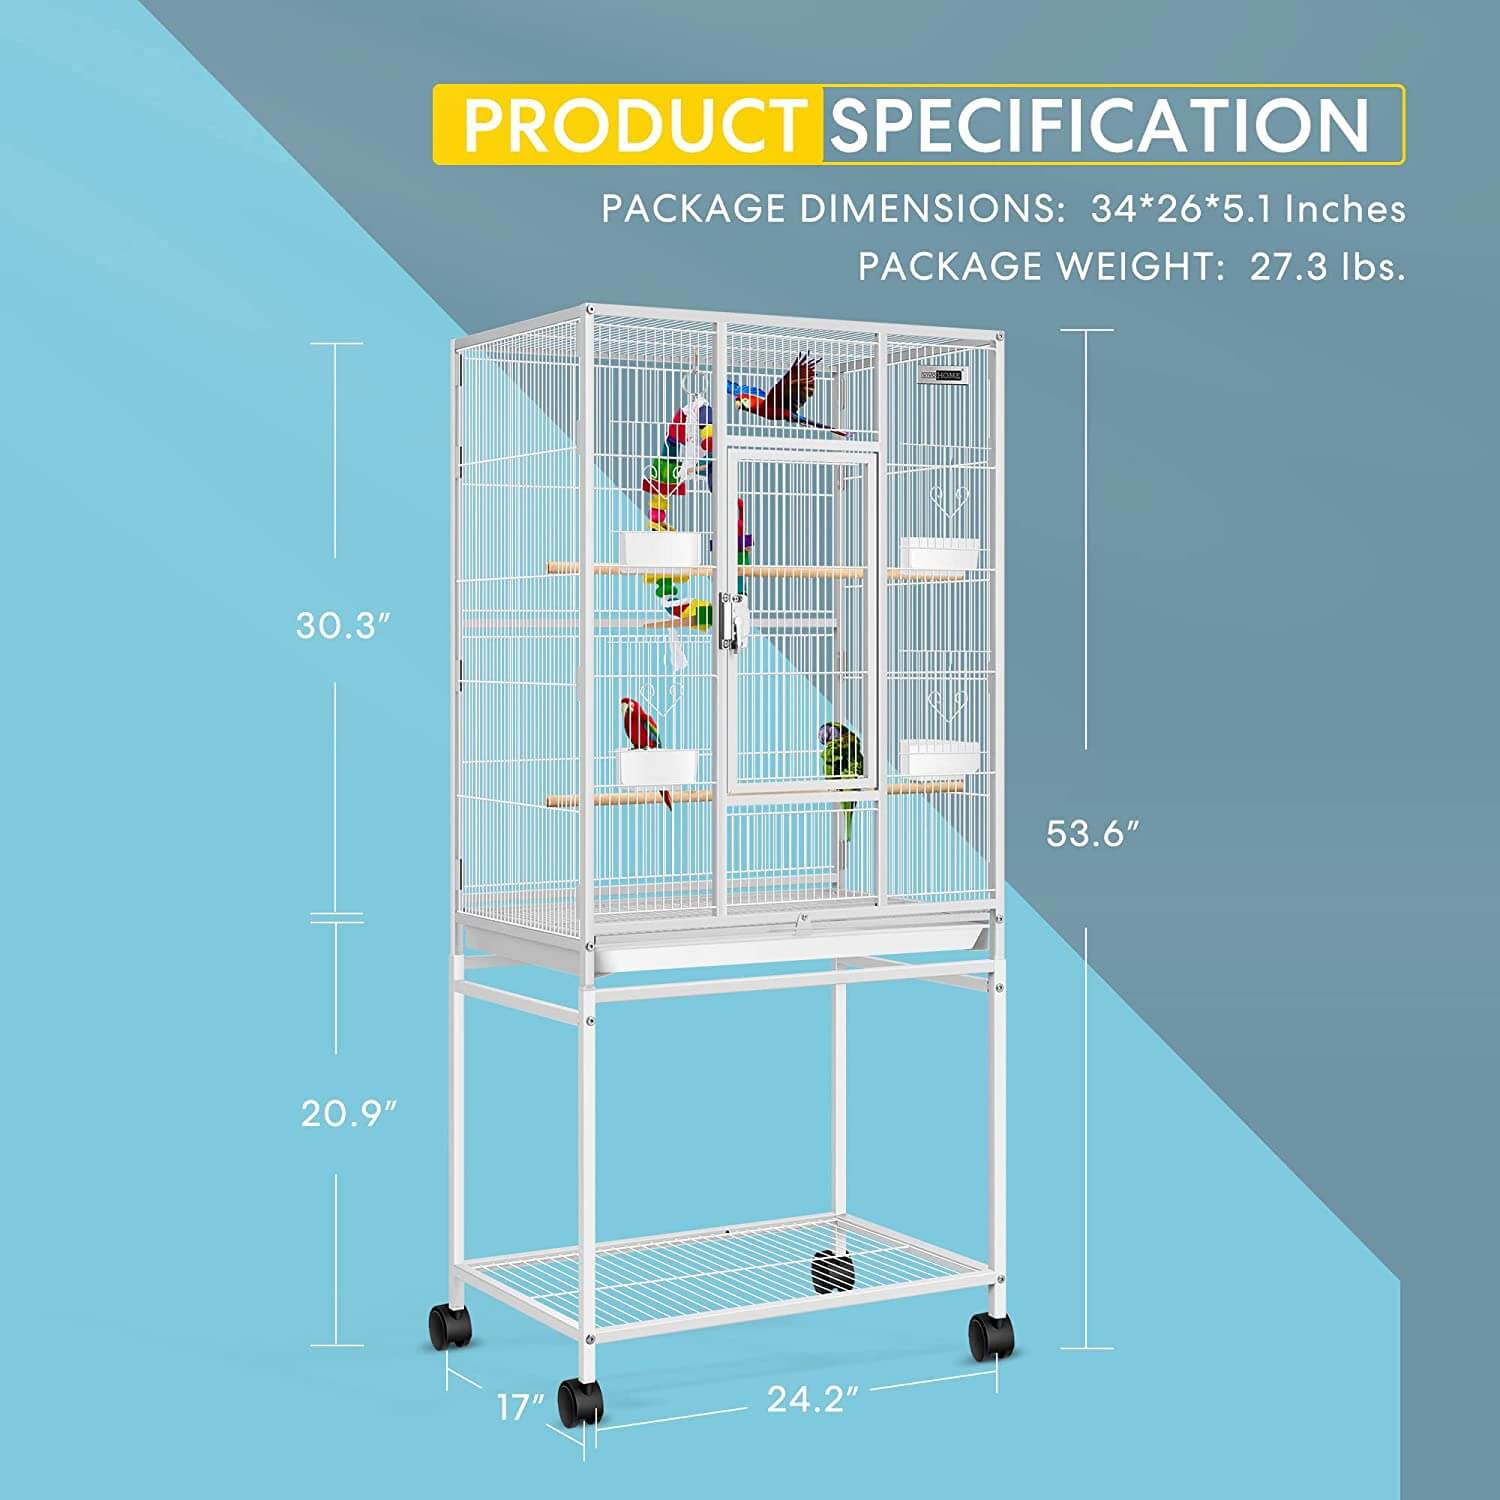 VIVOHOME 54 Inch Wrought Iron Bird Cage with Rolling Stand for Parrot Parakeet White